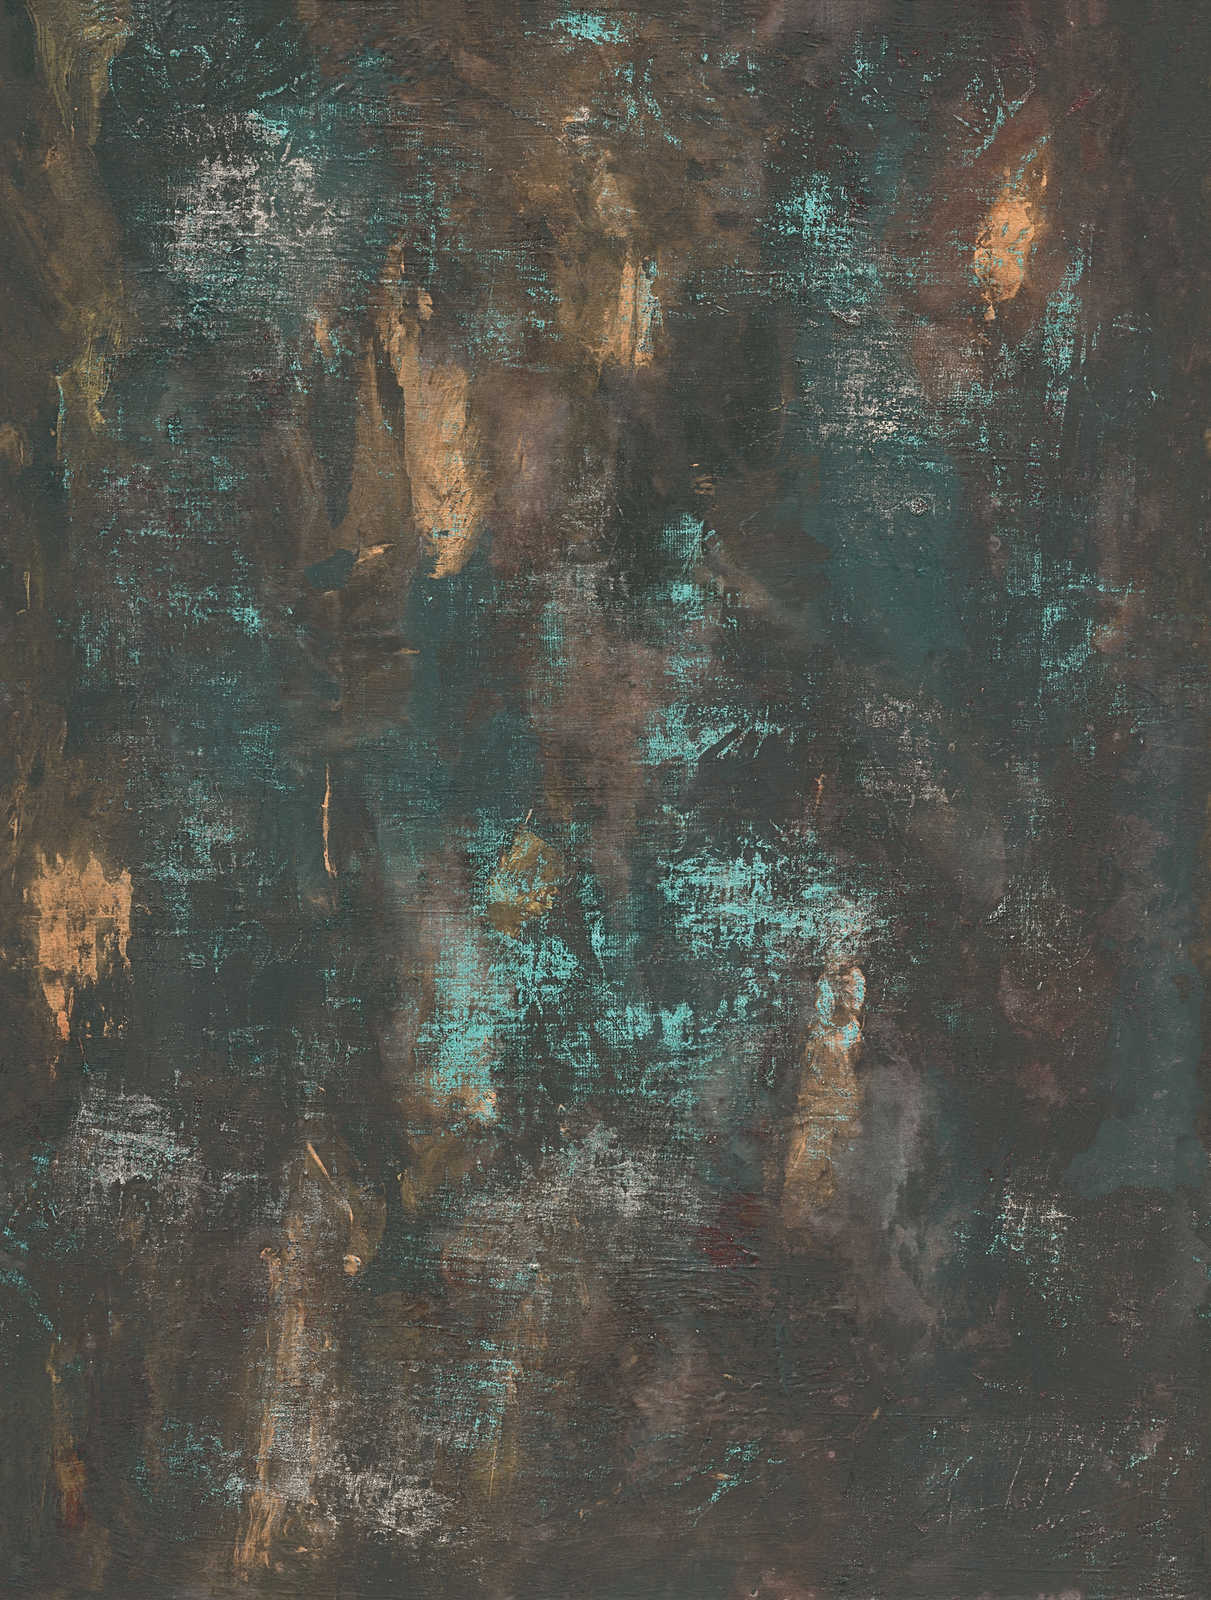             Wallpaper in abstract plaster look with dark colours - black, gold, turquoise
        